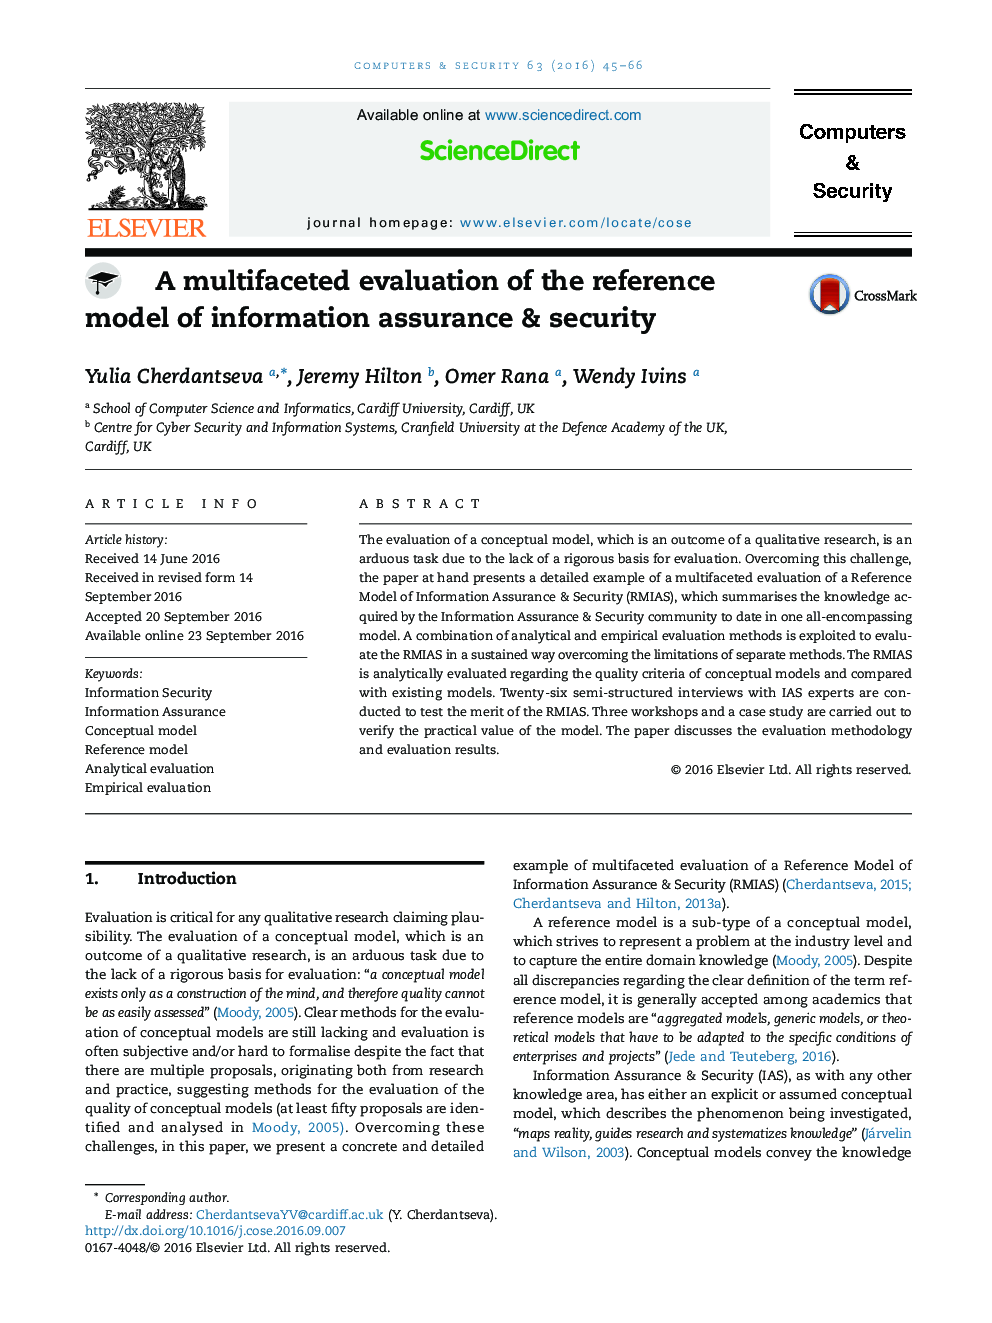 A multifaceted evaluation of the reference model of information assurance & security